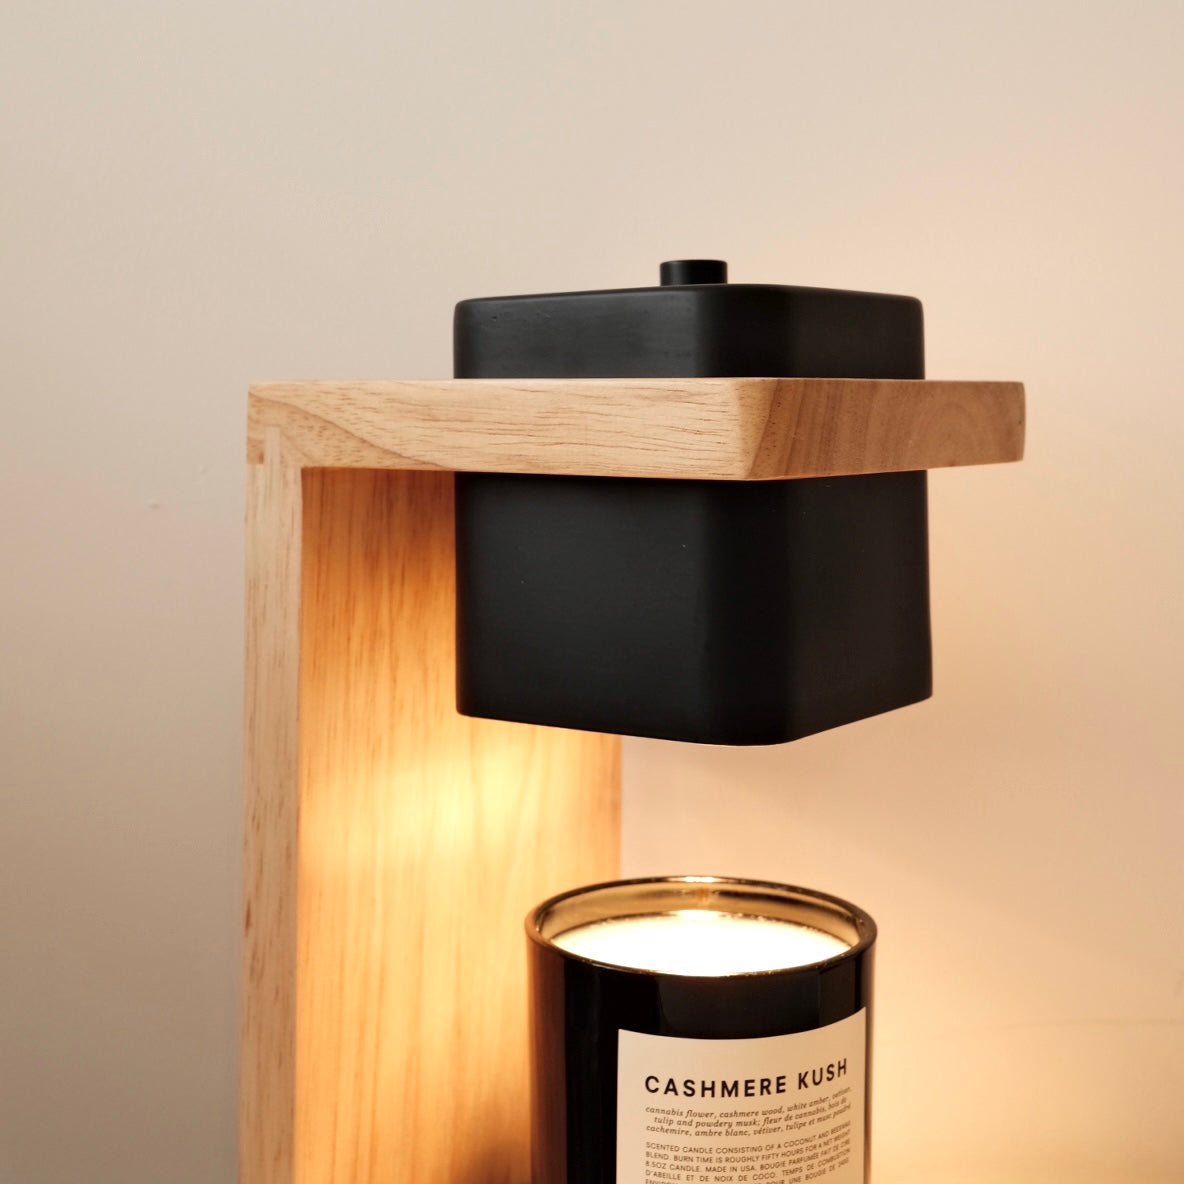 Coffee Wooden Candle Warmer 咖啡實木融蠟燈